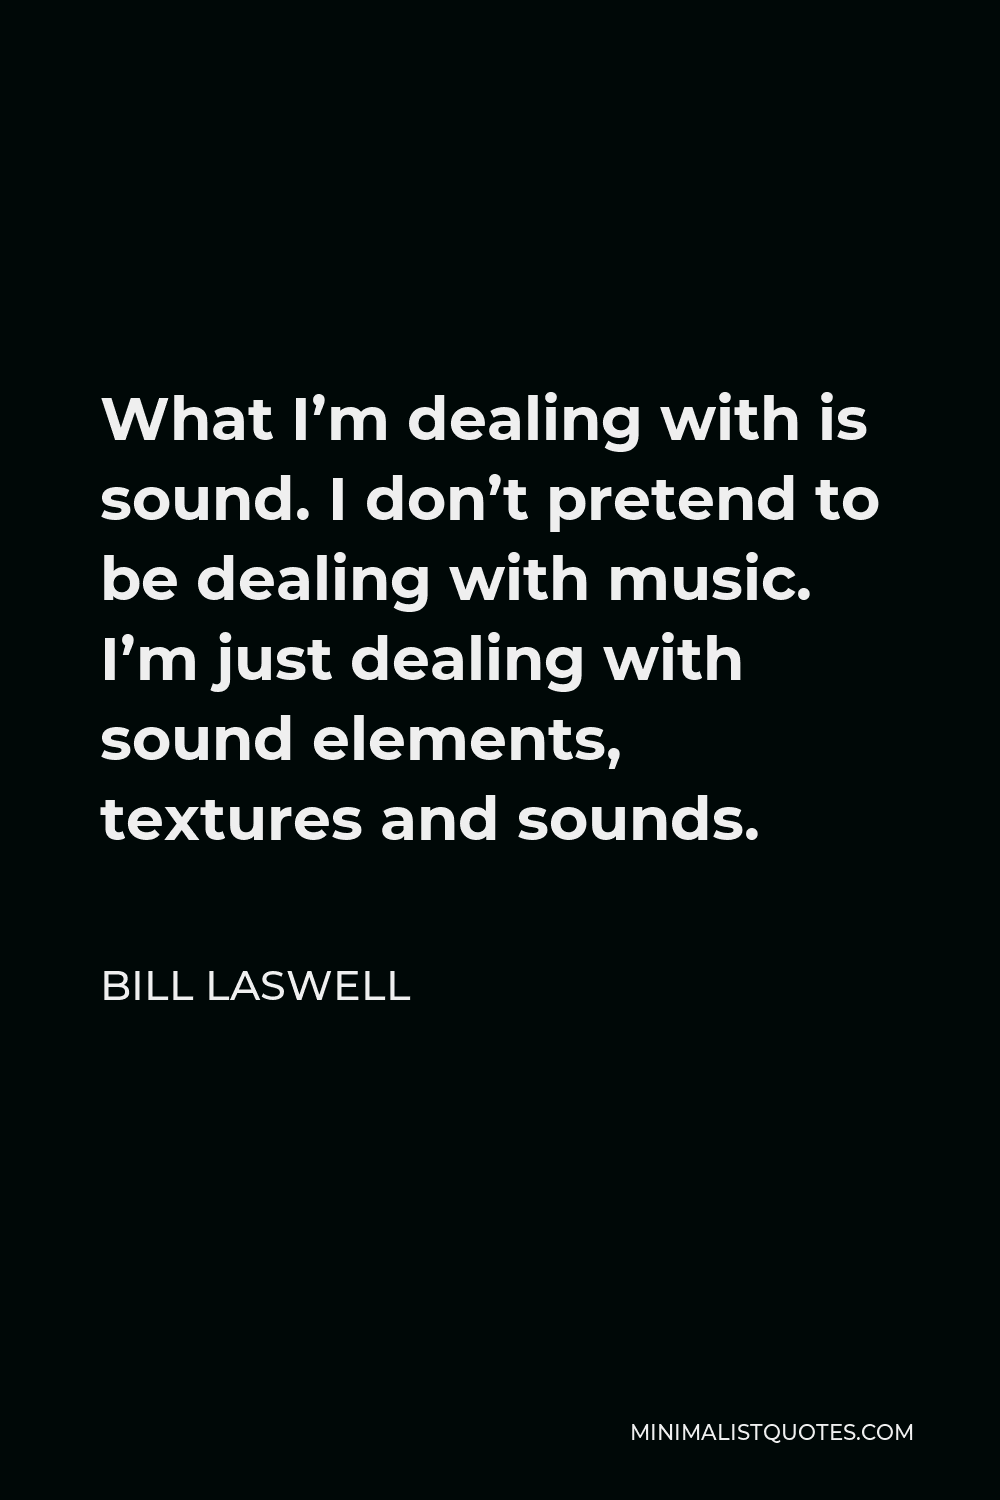 Bill Laswell Quote - What I’m dealing with is sound. I don’t pretend to be dealing with music. I’m just dealing with sound elements, textures and sounds.